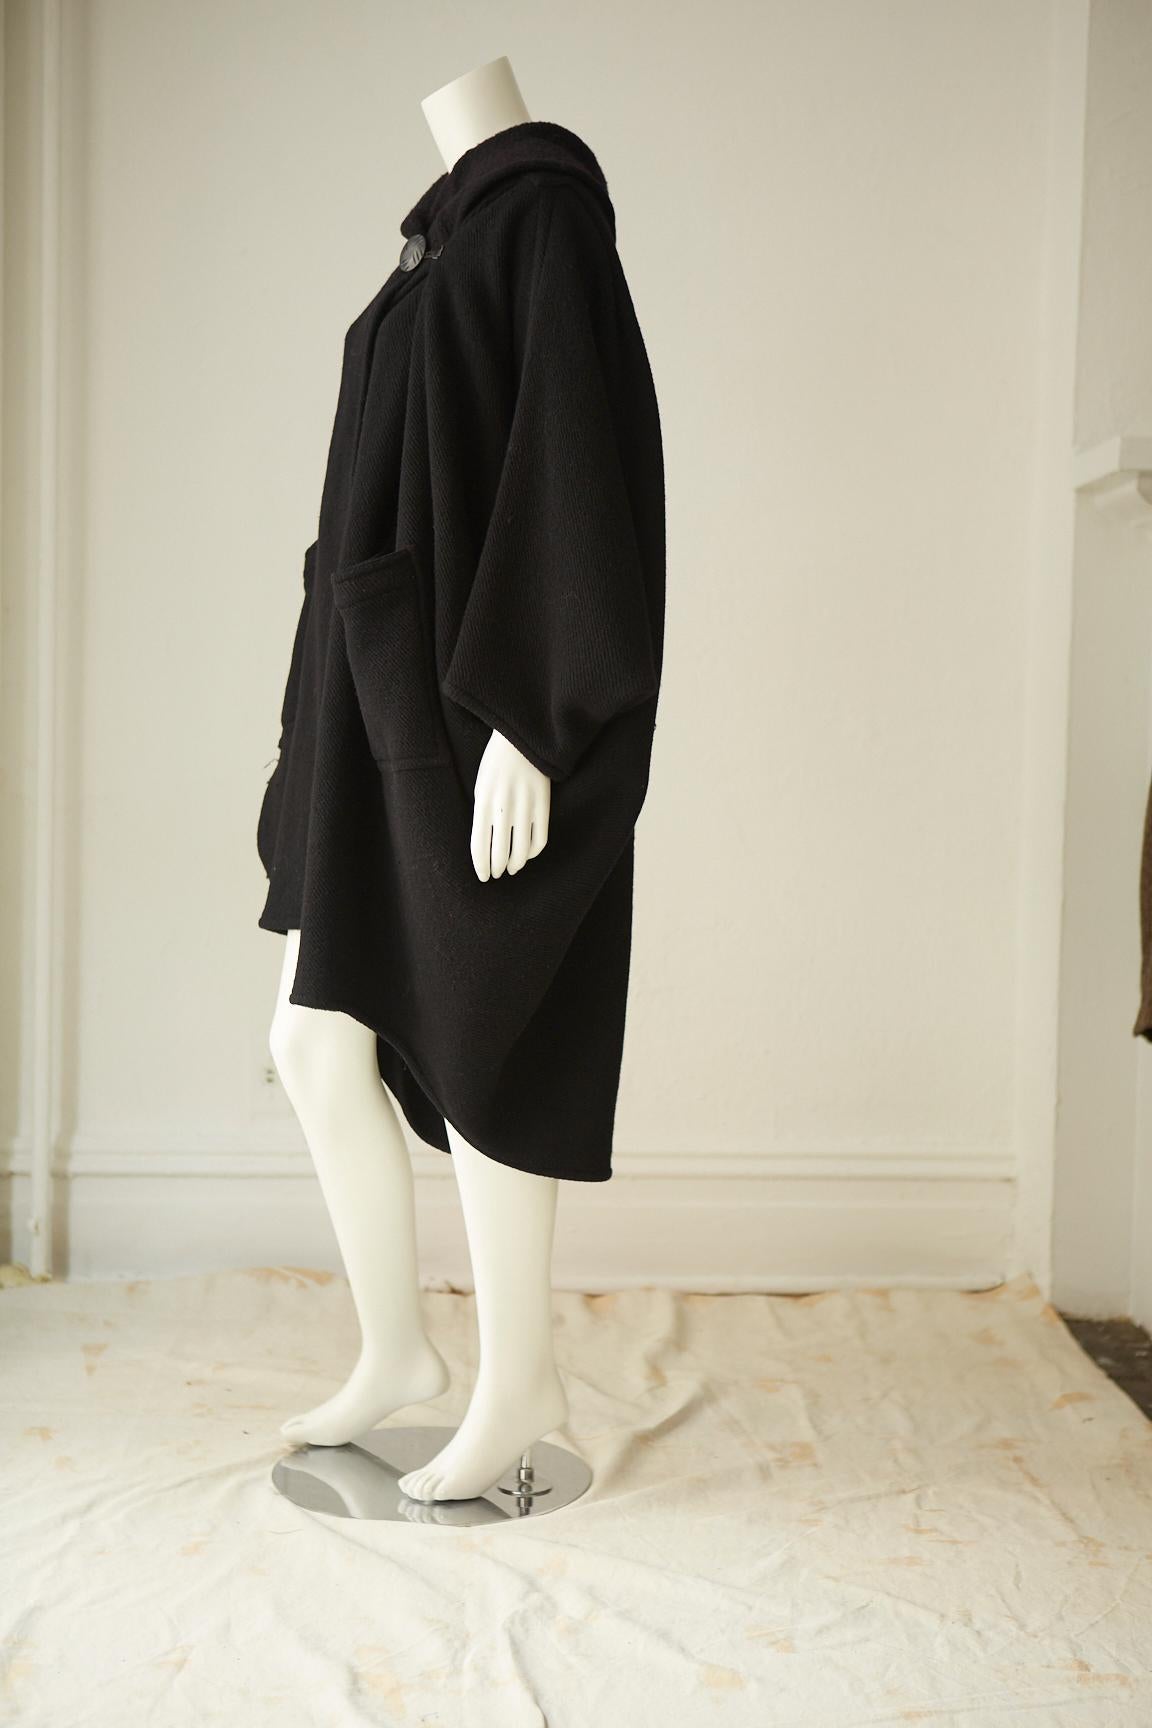 Rare Issey Miyake black wool butterfly coat with original label.
Features button closure at front center.
One size fits all.